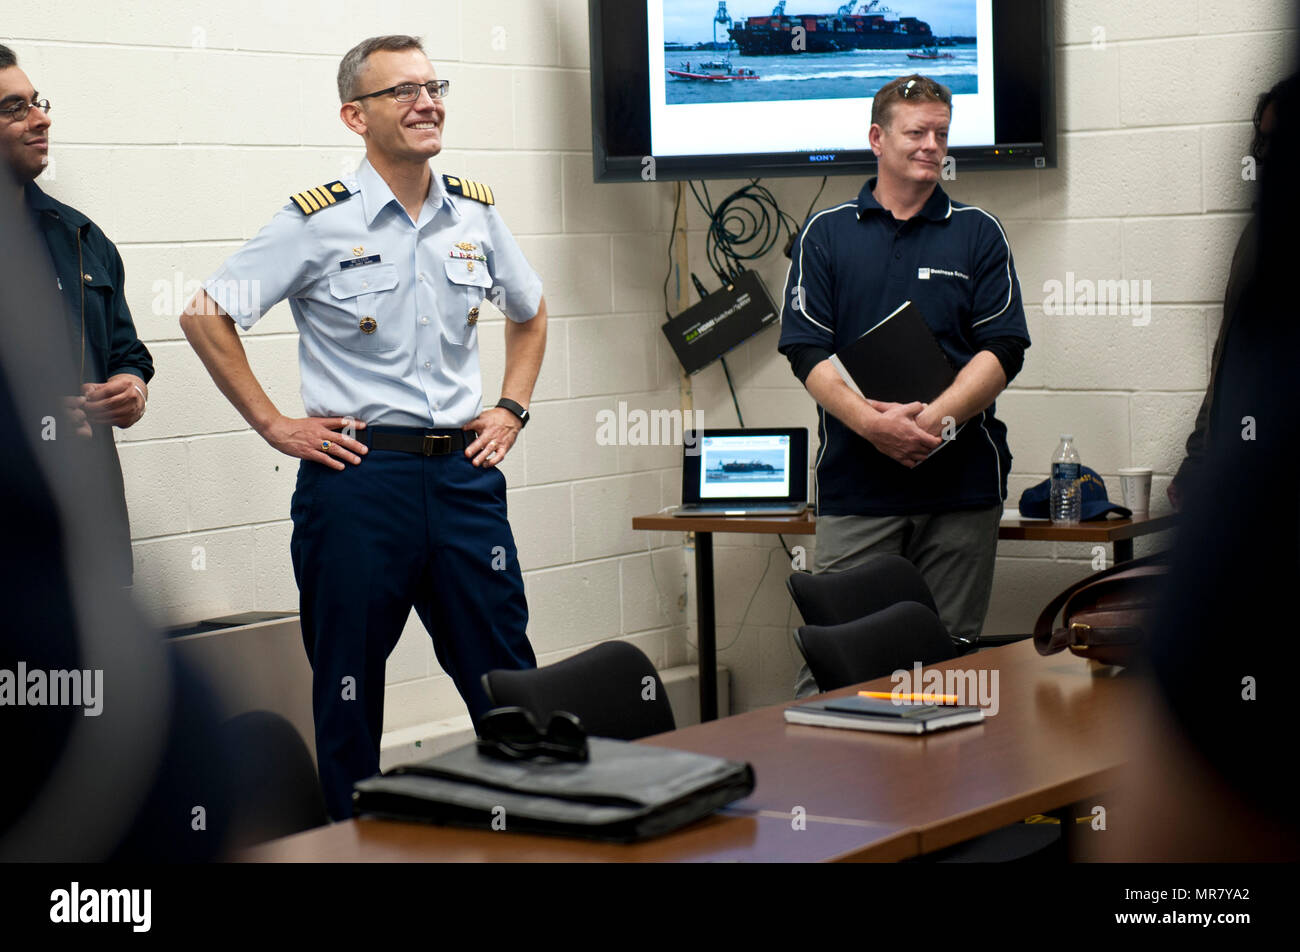 Coast Guard Cpt. Richard Wester, commander of Sector Hampton Roads in Portsmouth, Virginia, welcomes students from Queensland University of Technology in Brisbane, Queensland, Australia, during their tour of sector May 25, 2017. During the question and answer session, QUT students asked Wester about the structure of Sector Hampton Roads and about how the Coast Guard works with local, state and federal agencies. (U.S. Coast Guard photo by Petty Officer 3rd Class Corinne Zilnicki/Released) Stock Photo